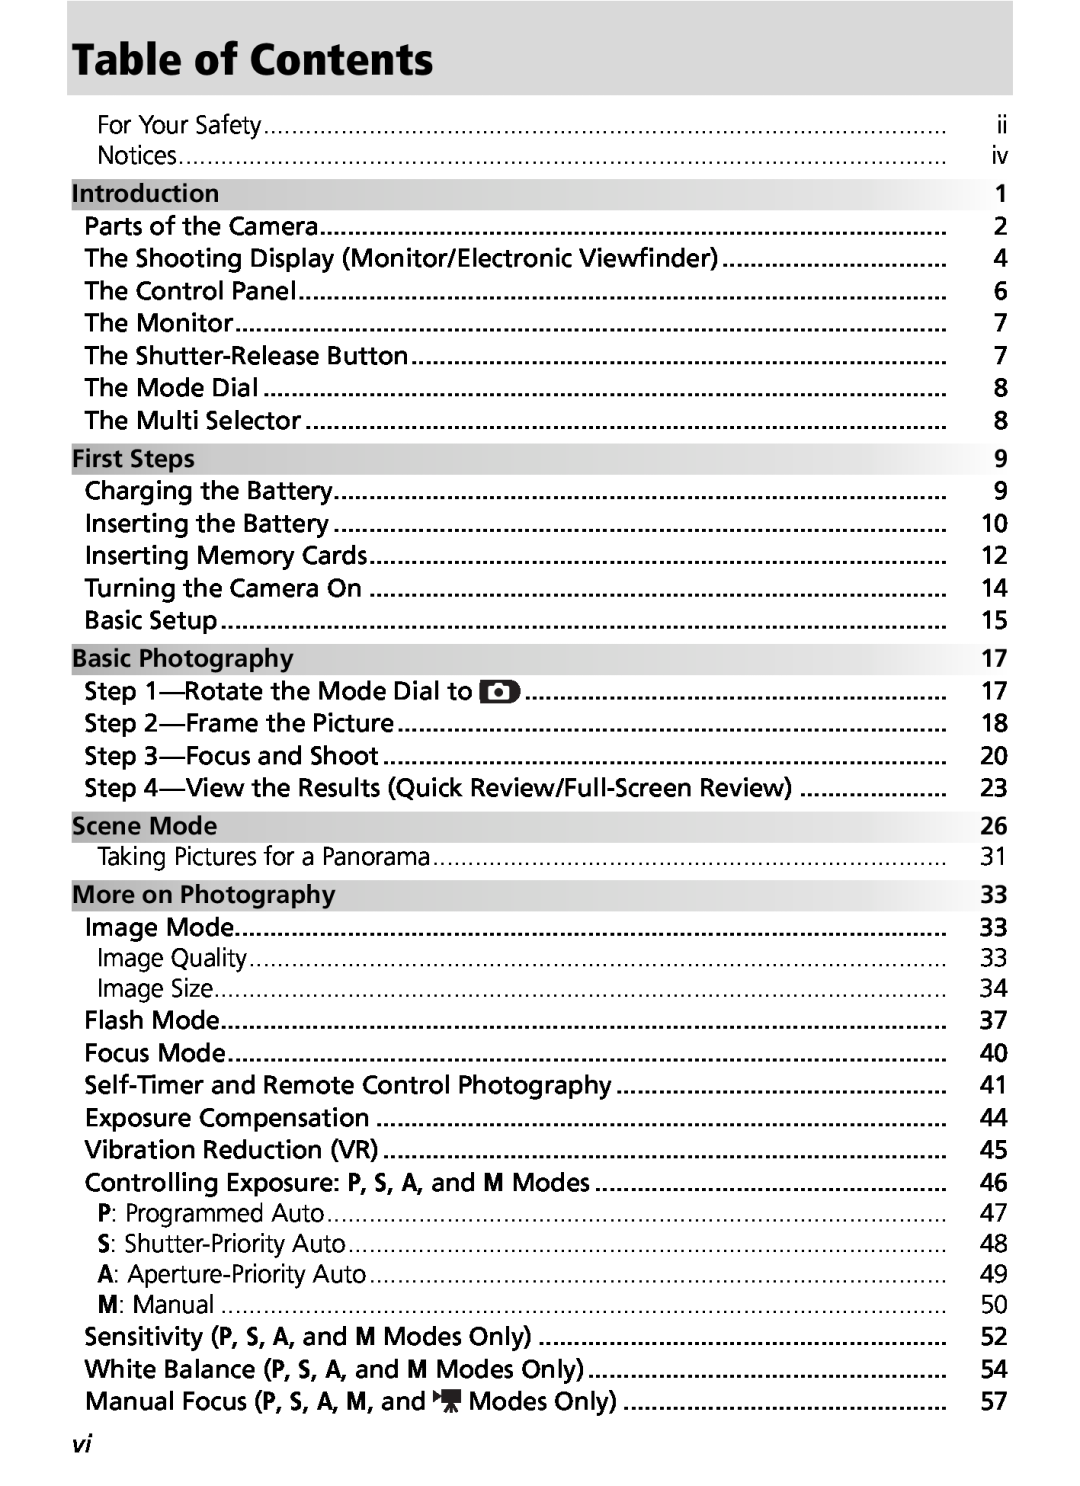 Nikon COOLPIX8800 manual Table of Contents, Introduction, First Steps, Basic Photography, Scene Mode, More on Photography 